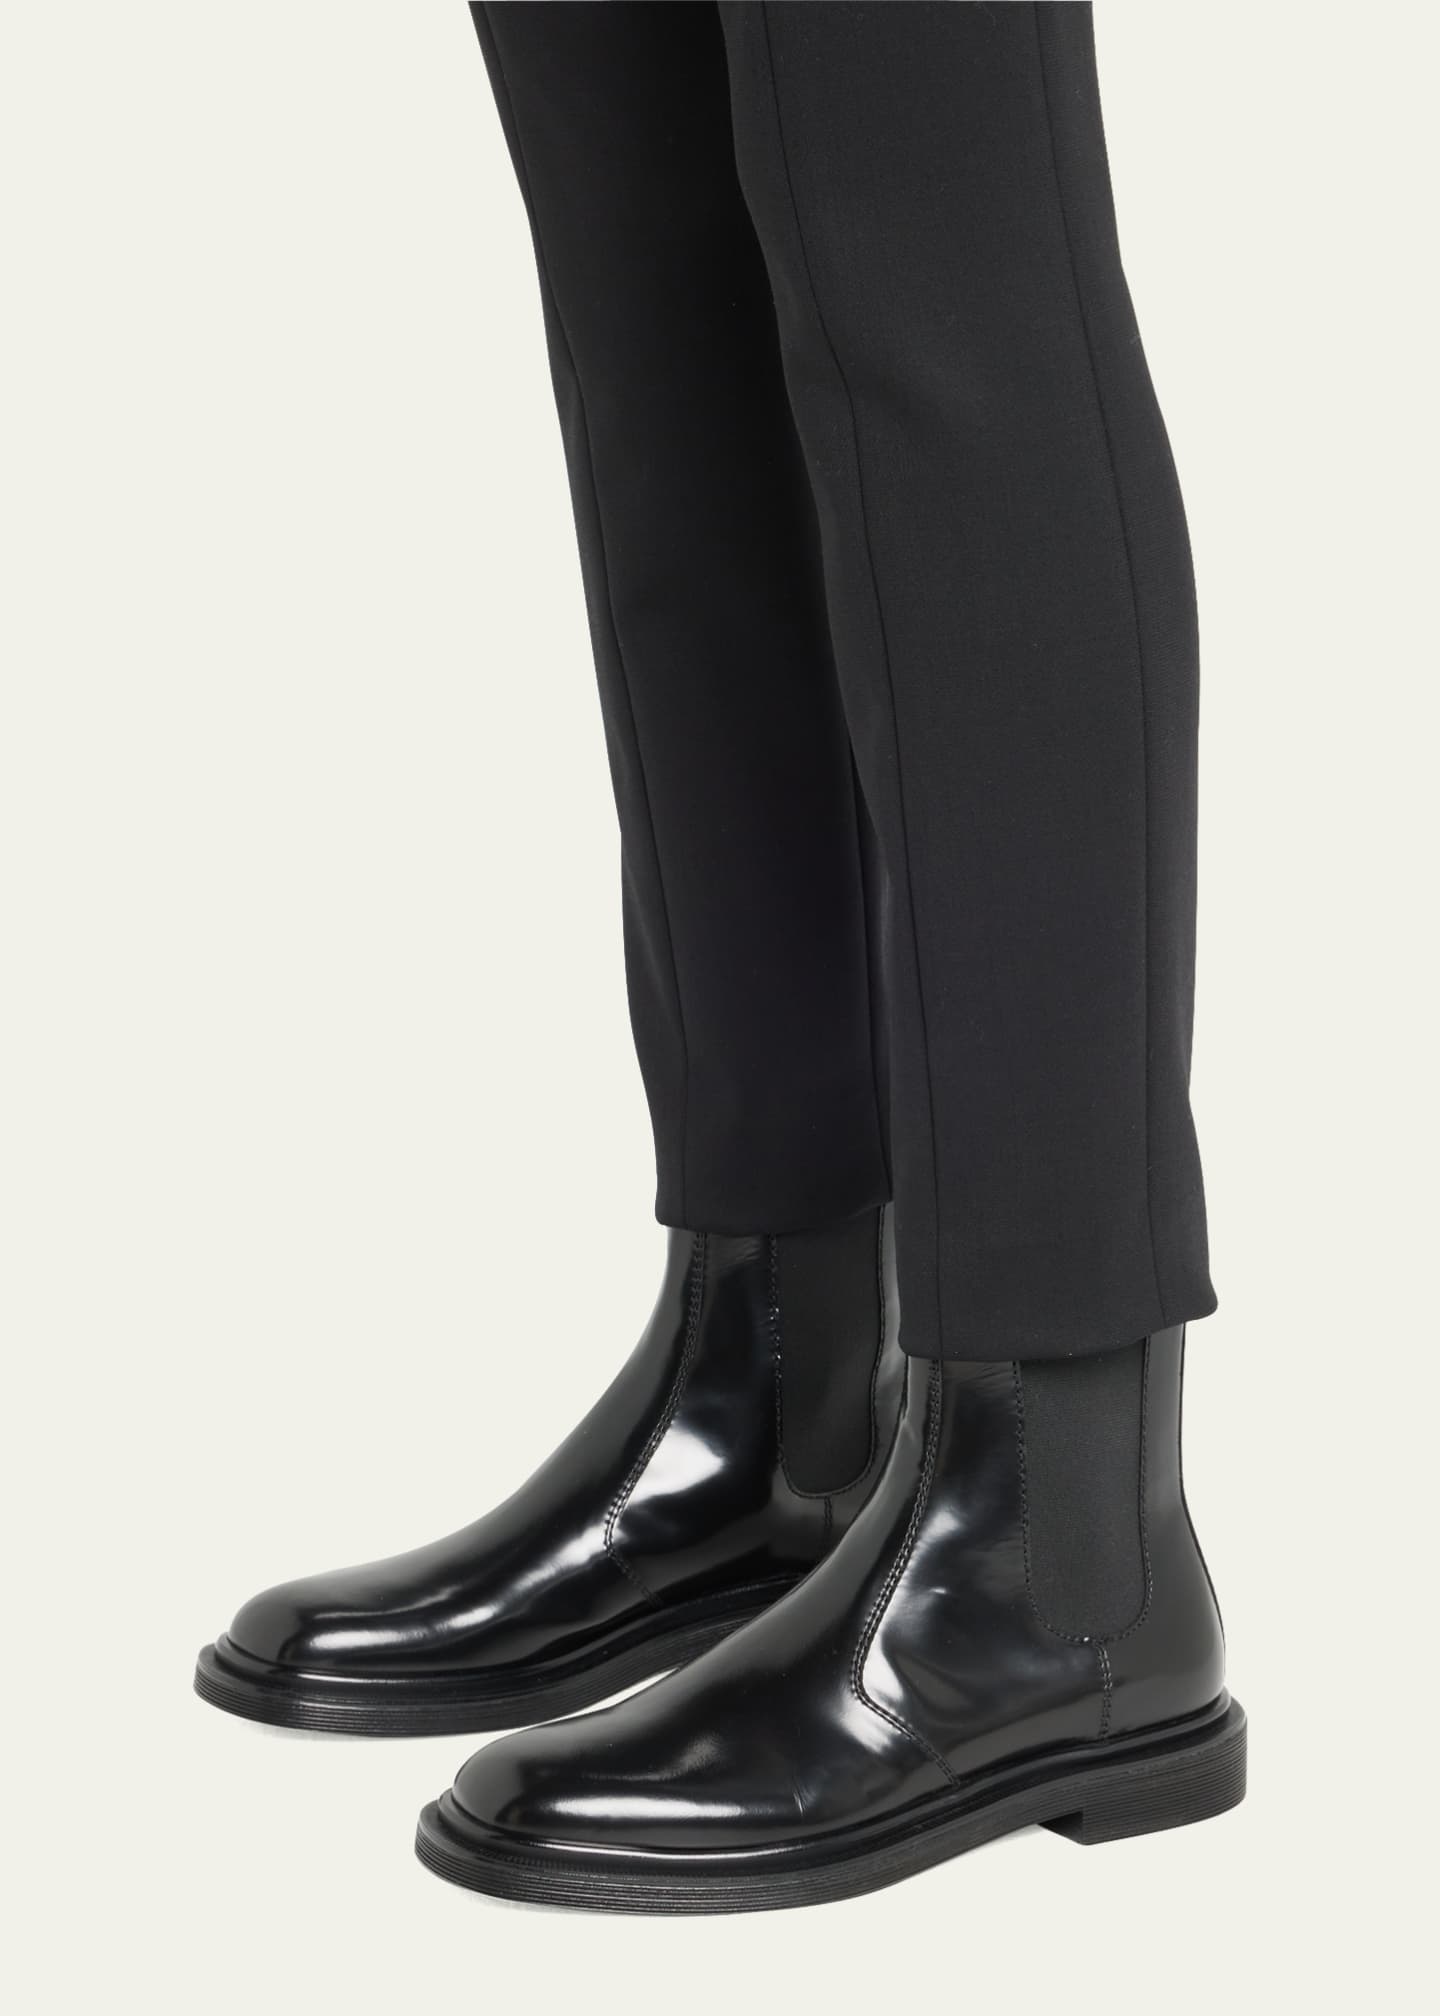 THE ROW Ranger Patent Leather Chelsea Boots - Bergdorf Goodman